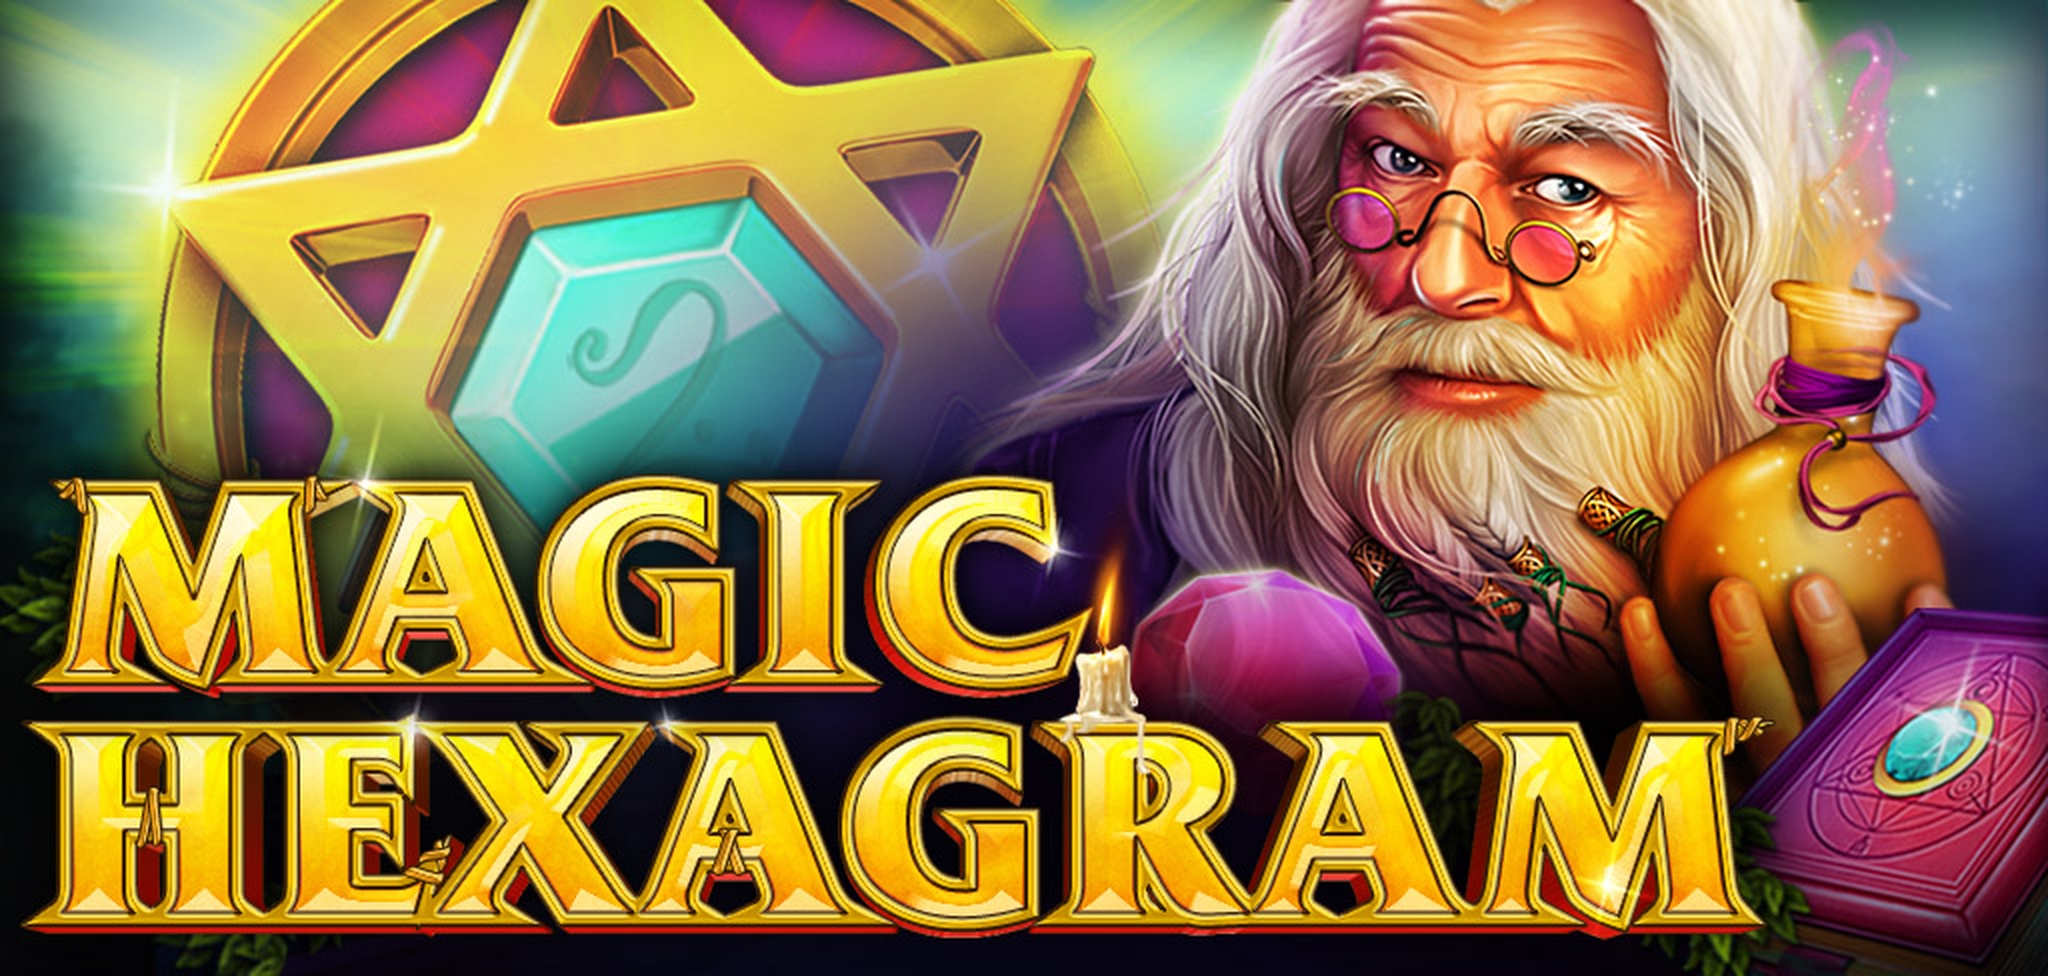 The Magic Hexagram Online Slot Demo Game by casino technology